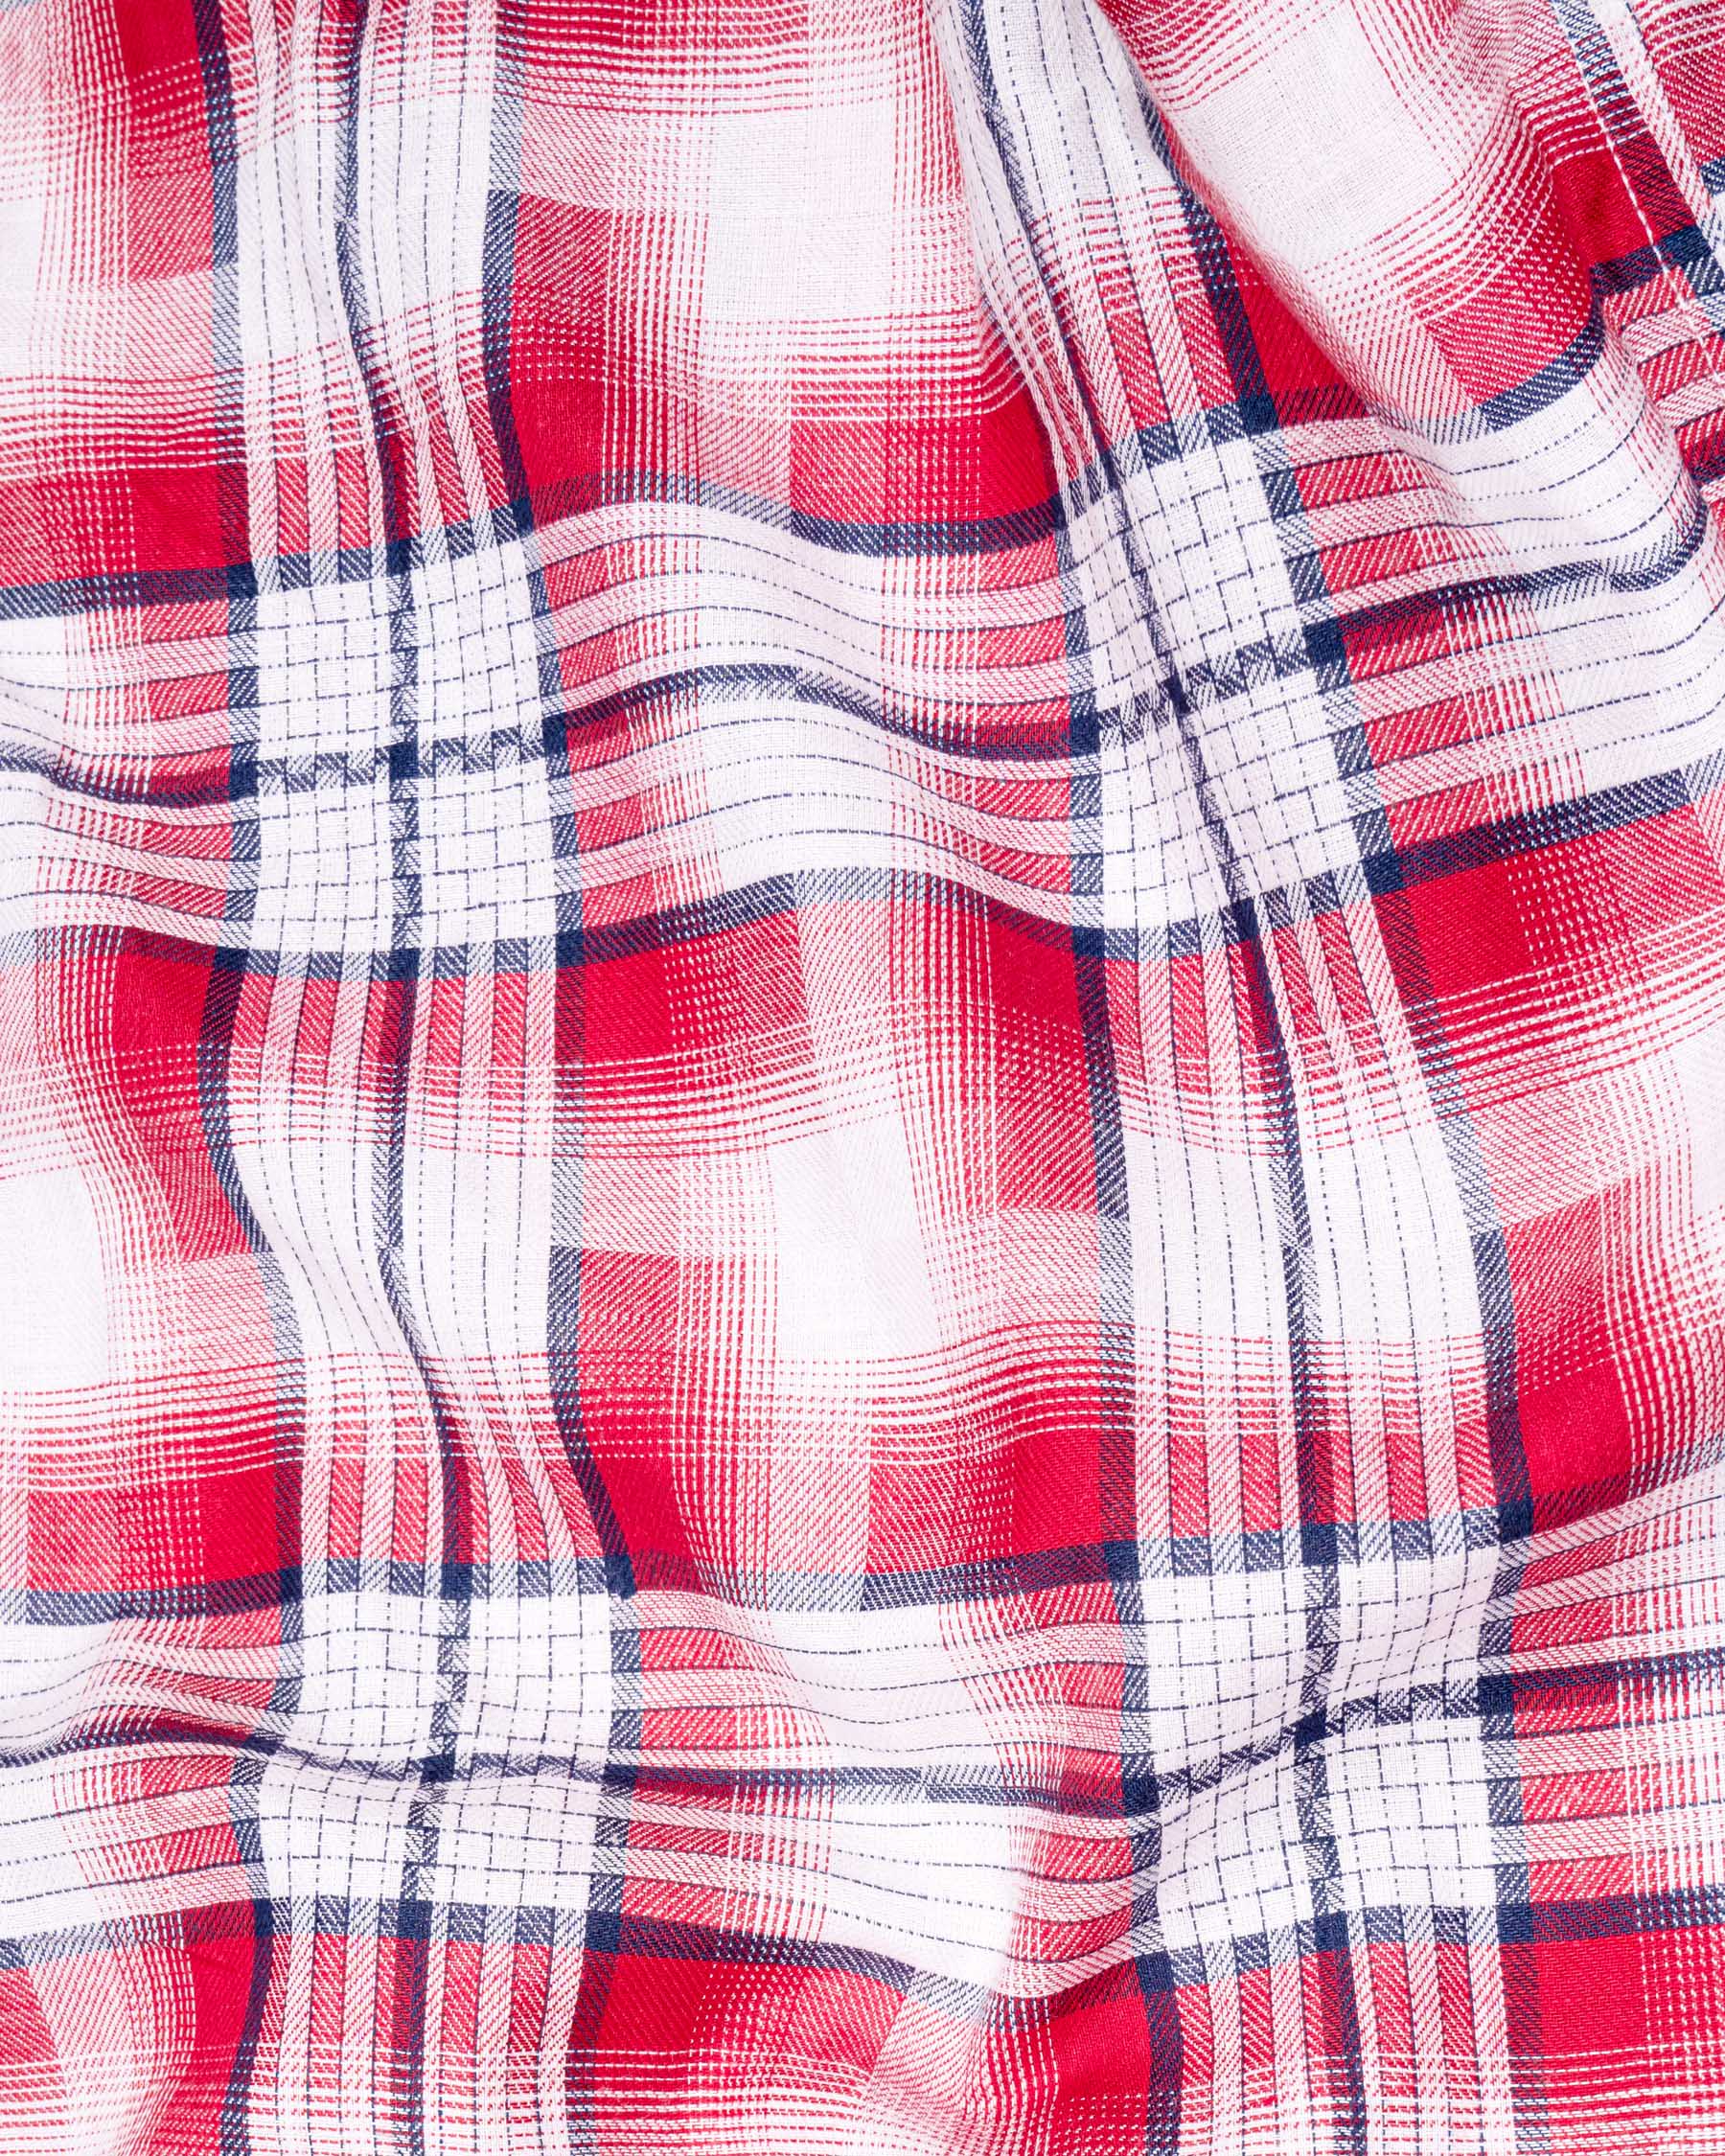 Bright White and Scarlet Red Plaid Twill Premium Cotton Shirt 6971-M-38,6971-M-38,6971-M-39,6971-M-39,6971-M-40,6971-M-40,6971-M-42,6971-M-42,6971-M-44,6971-M-44,6971-M-46,6971-M-46,6971-M-48,6971-M-48,6971-M-50,6971-M-50,6971-M-52,6971-M-52